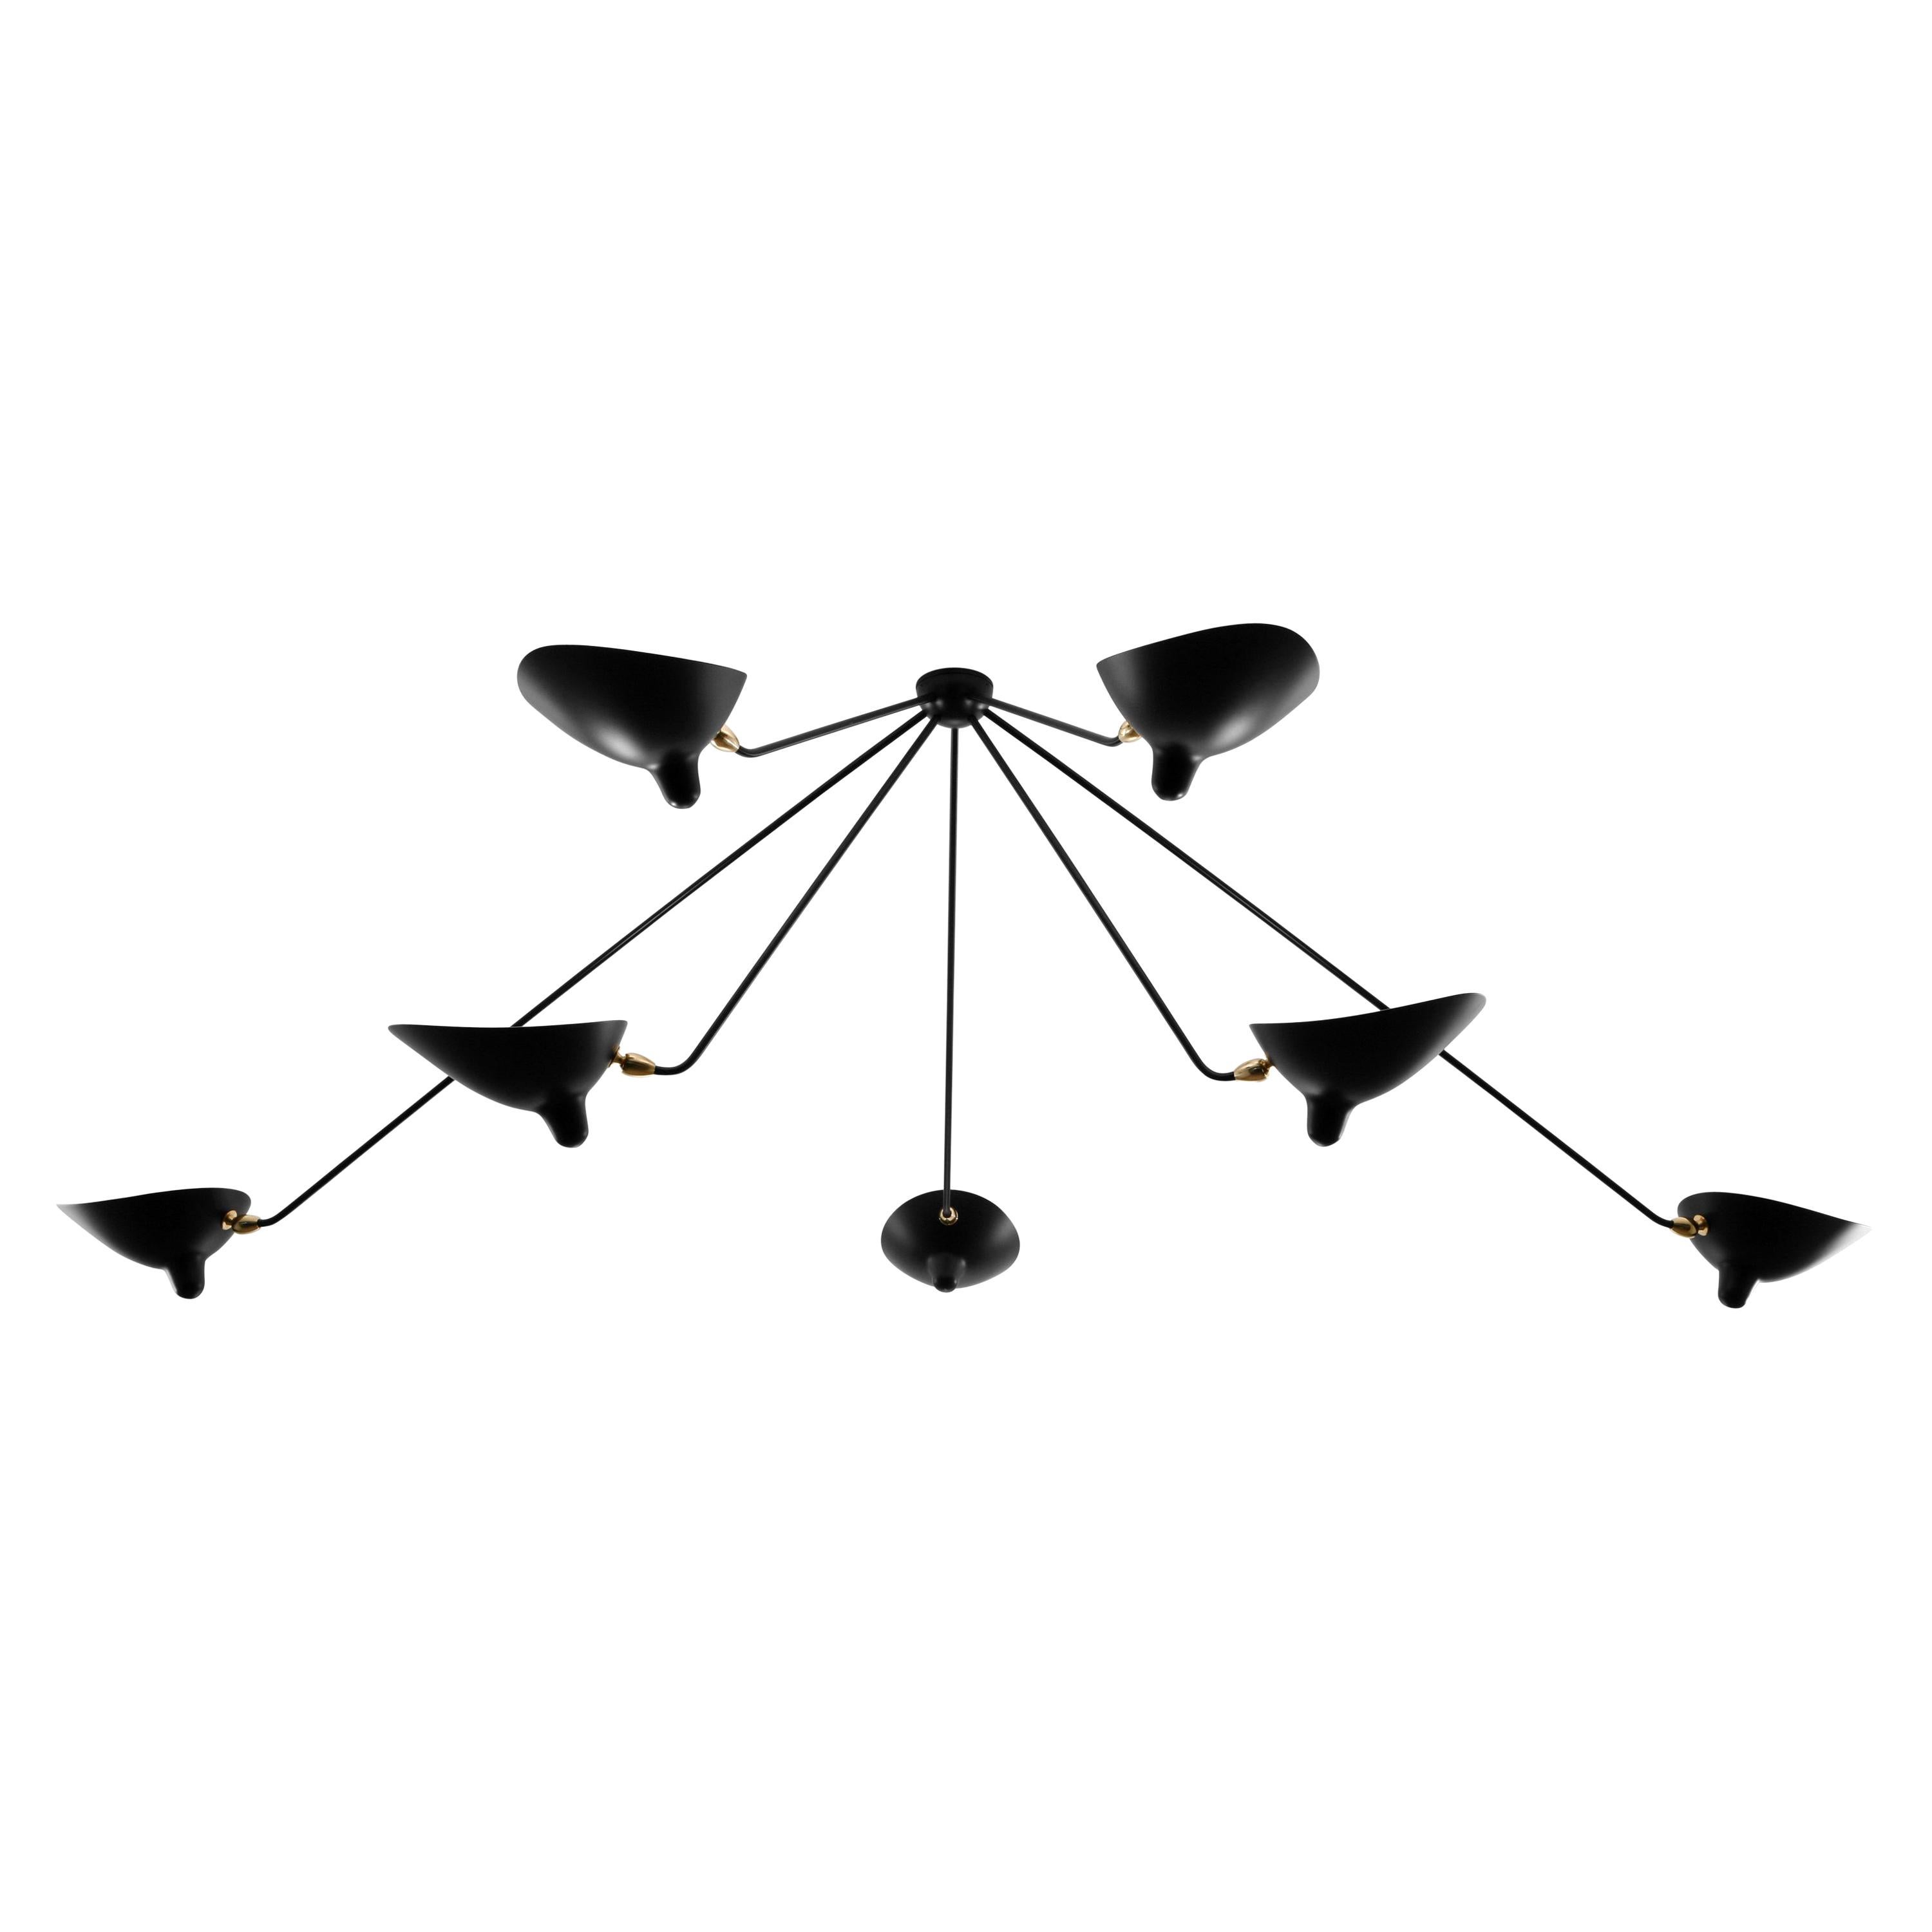 Ceiling Pendant Spider Lamp with Seven Fixed Arms by Les Editions, Serge Mouille For Sale